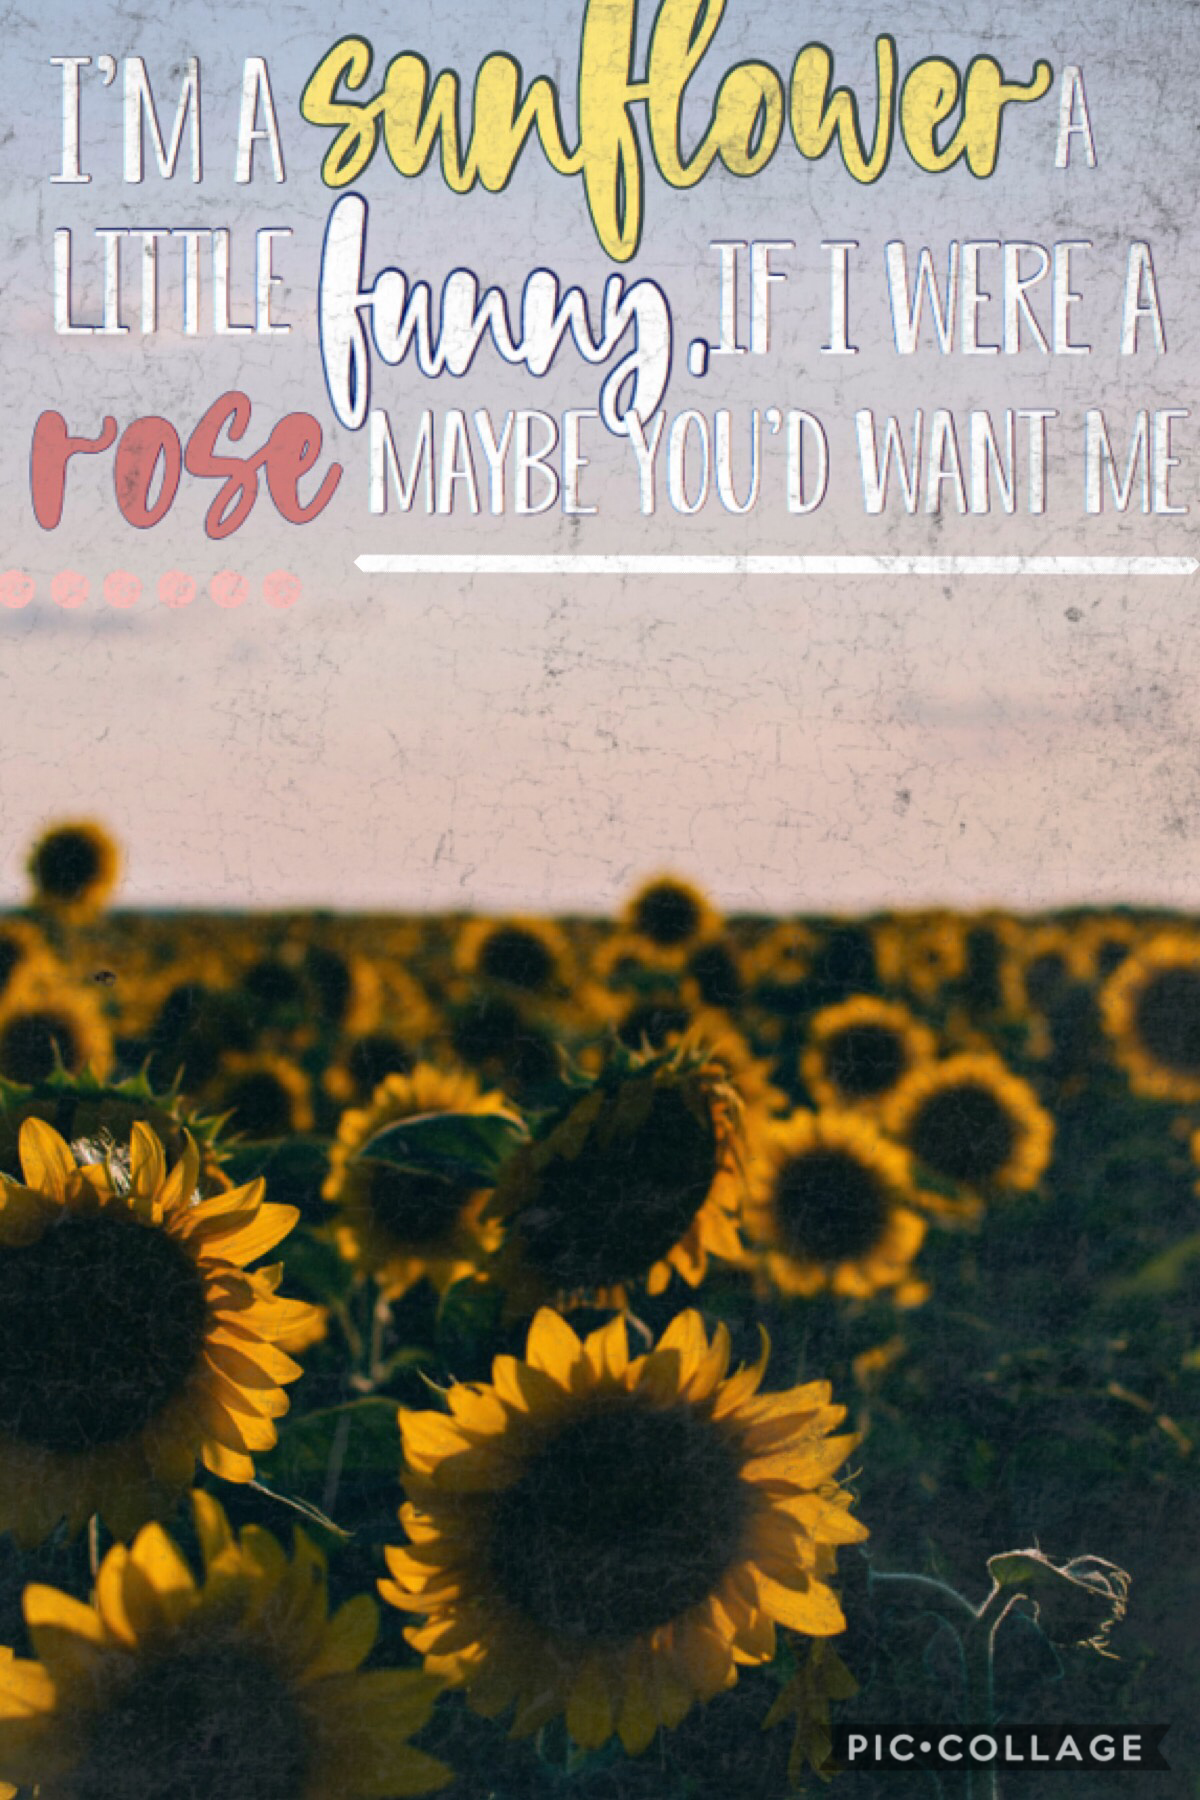 Tap
Song: Sunflower ~Sierra Burgess 
Sorry I haven’t been posting much, the last few nights I’ve been up late doing last minute homework cos I’m an idiot and leave it to the last minute 😂

9th November 